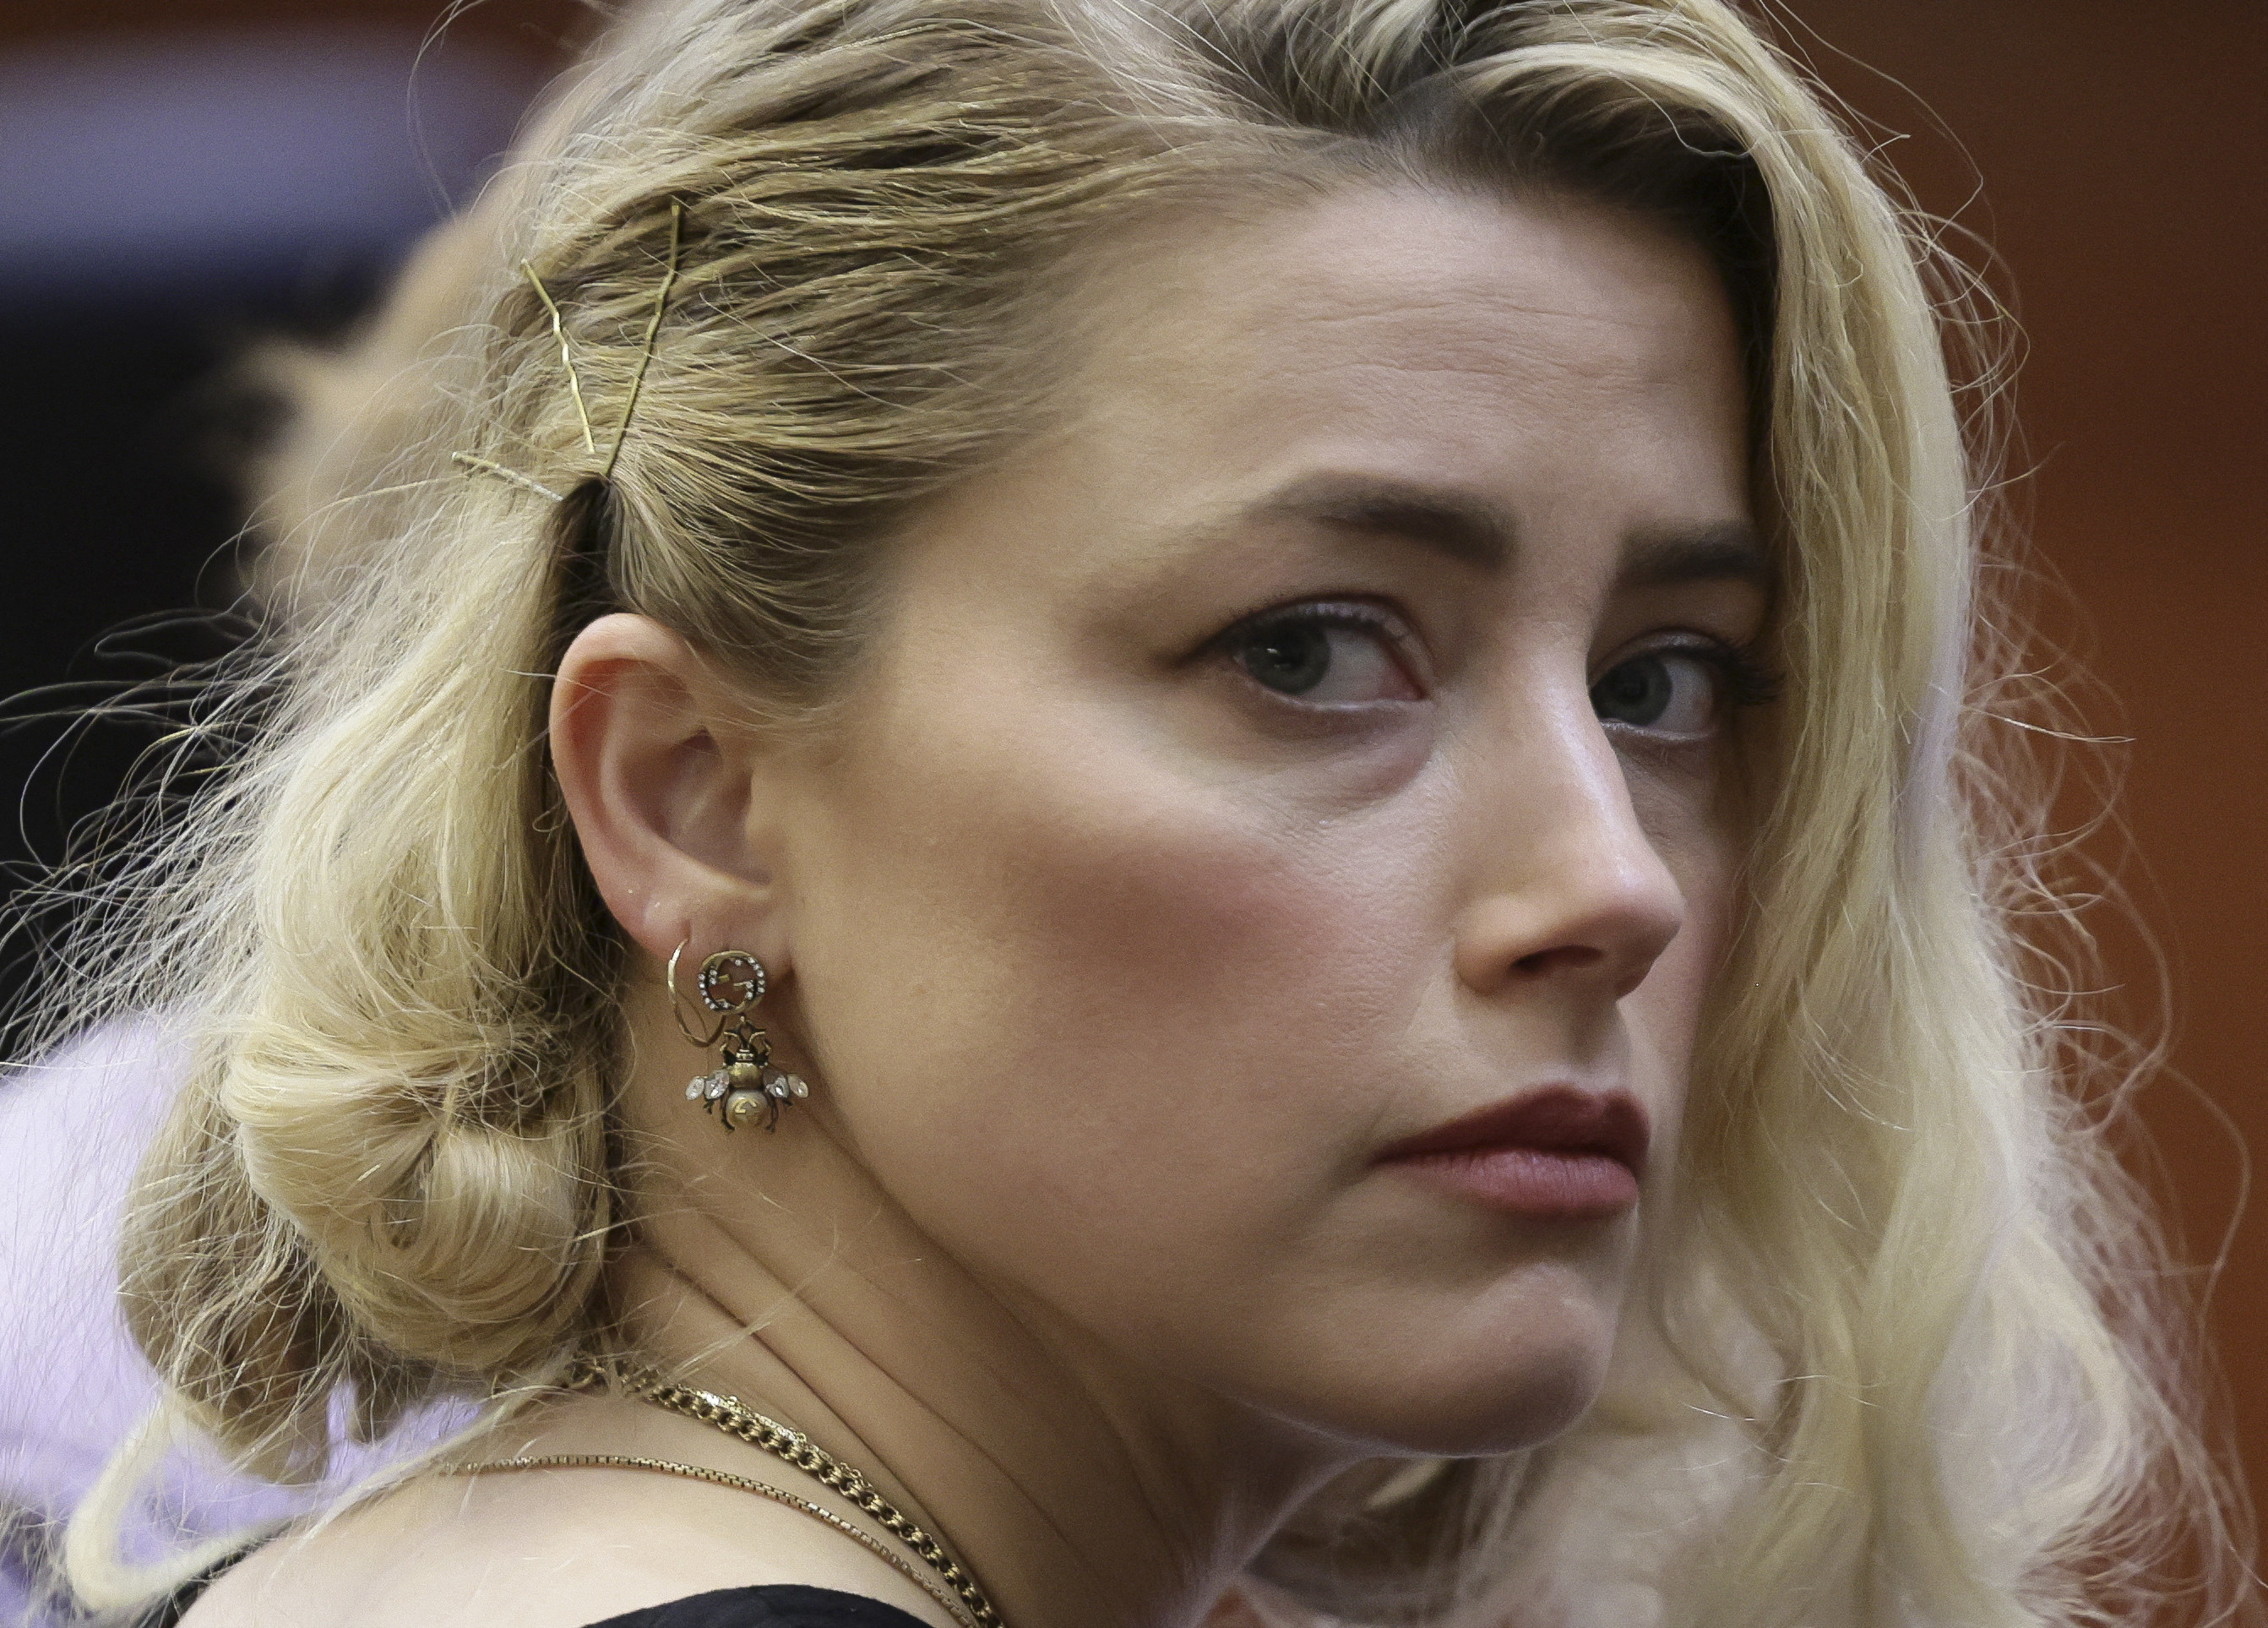 The Johnny Depp Vs. Amber Heard Trial Was Exhausting To Watch